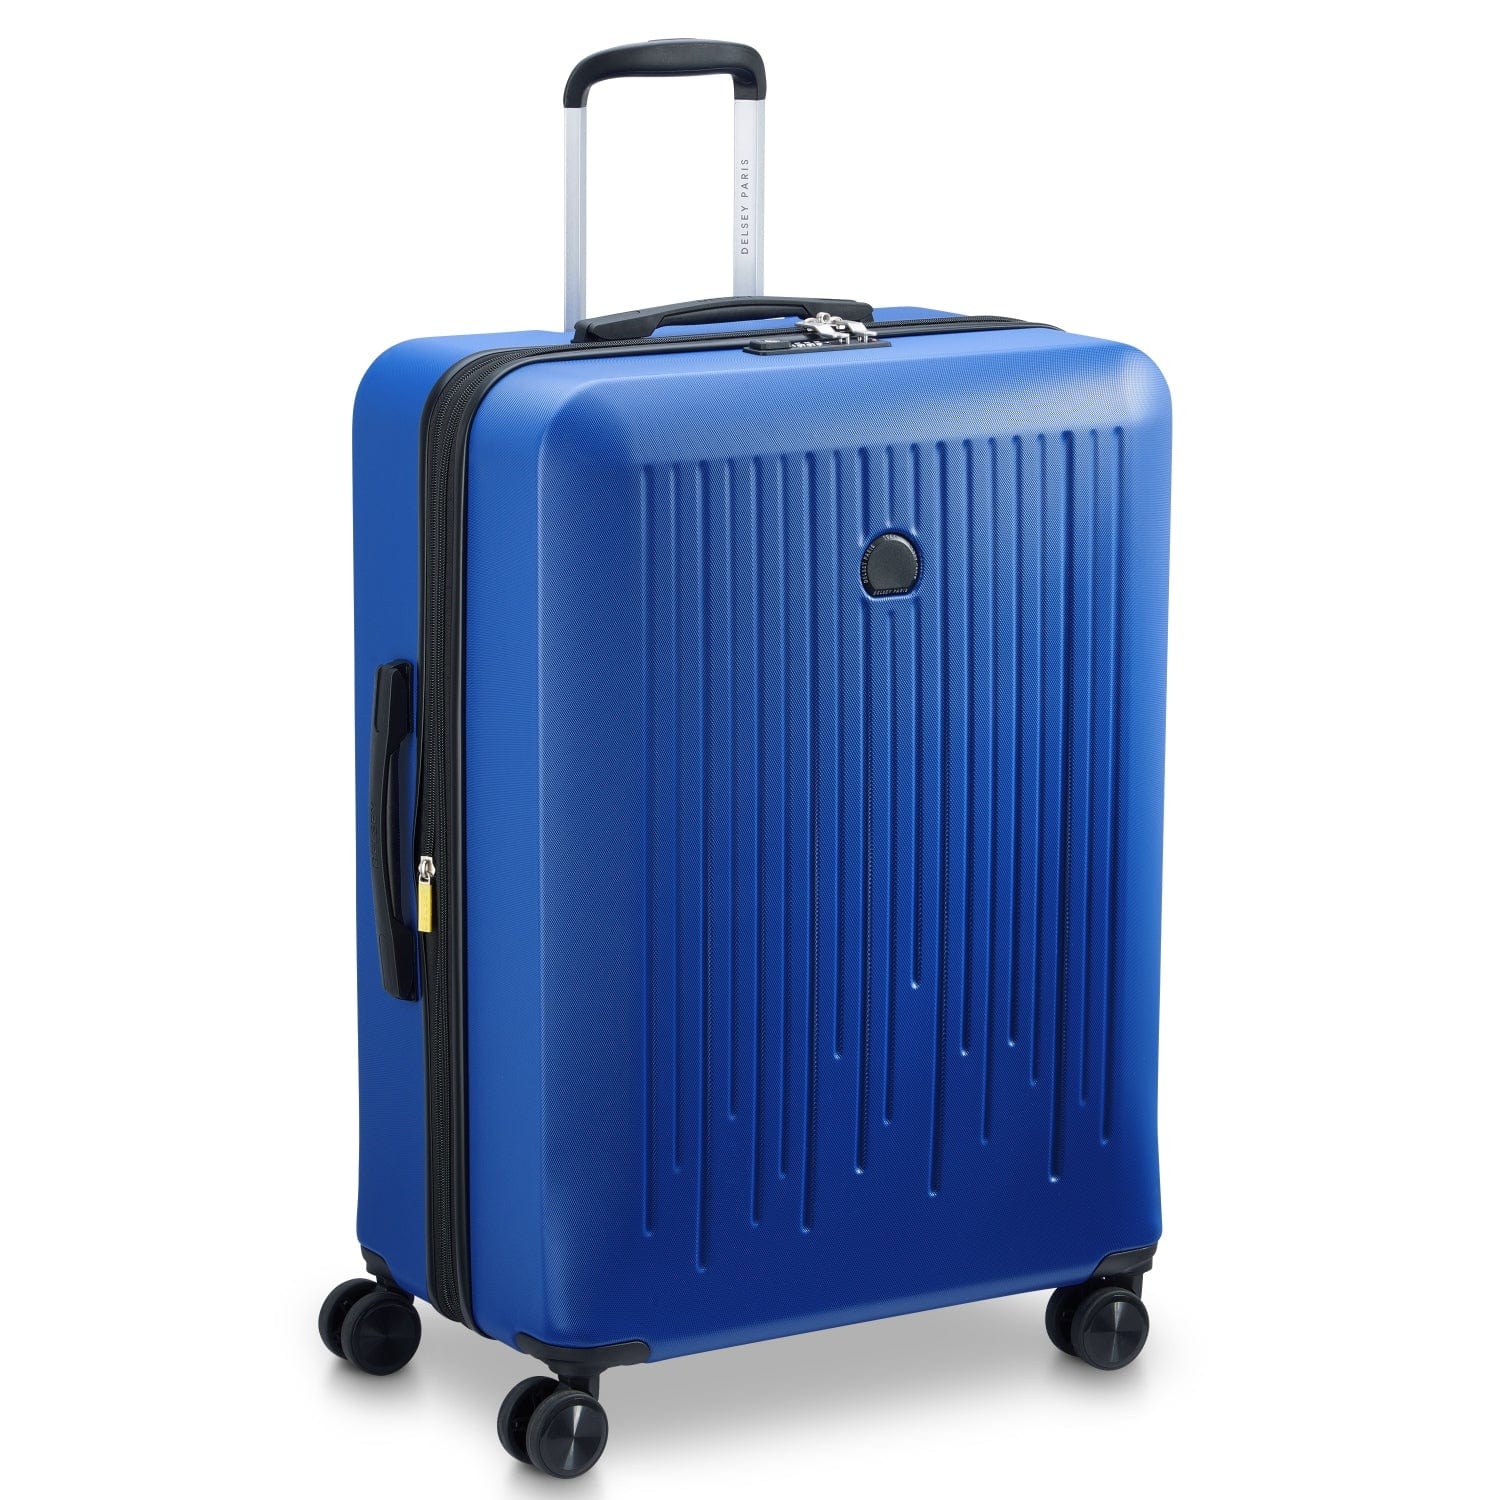 Delsey Christine 55+70+82cm Hardcase 4 Double Wheel Expandable Cabin & Check-In Luggage Trolley Set Klein Blue + FREE Delsey Agreable Backpack